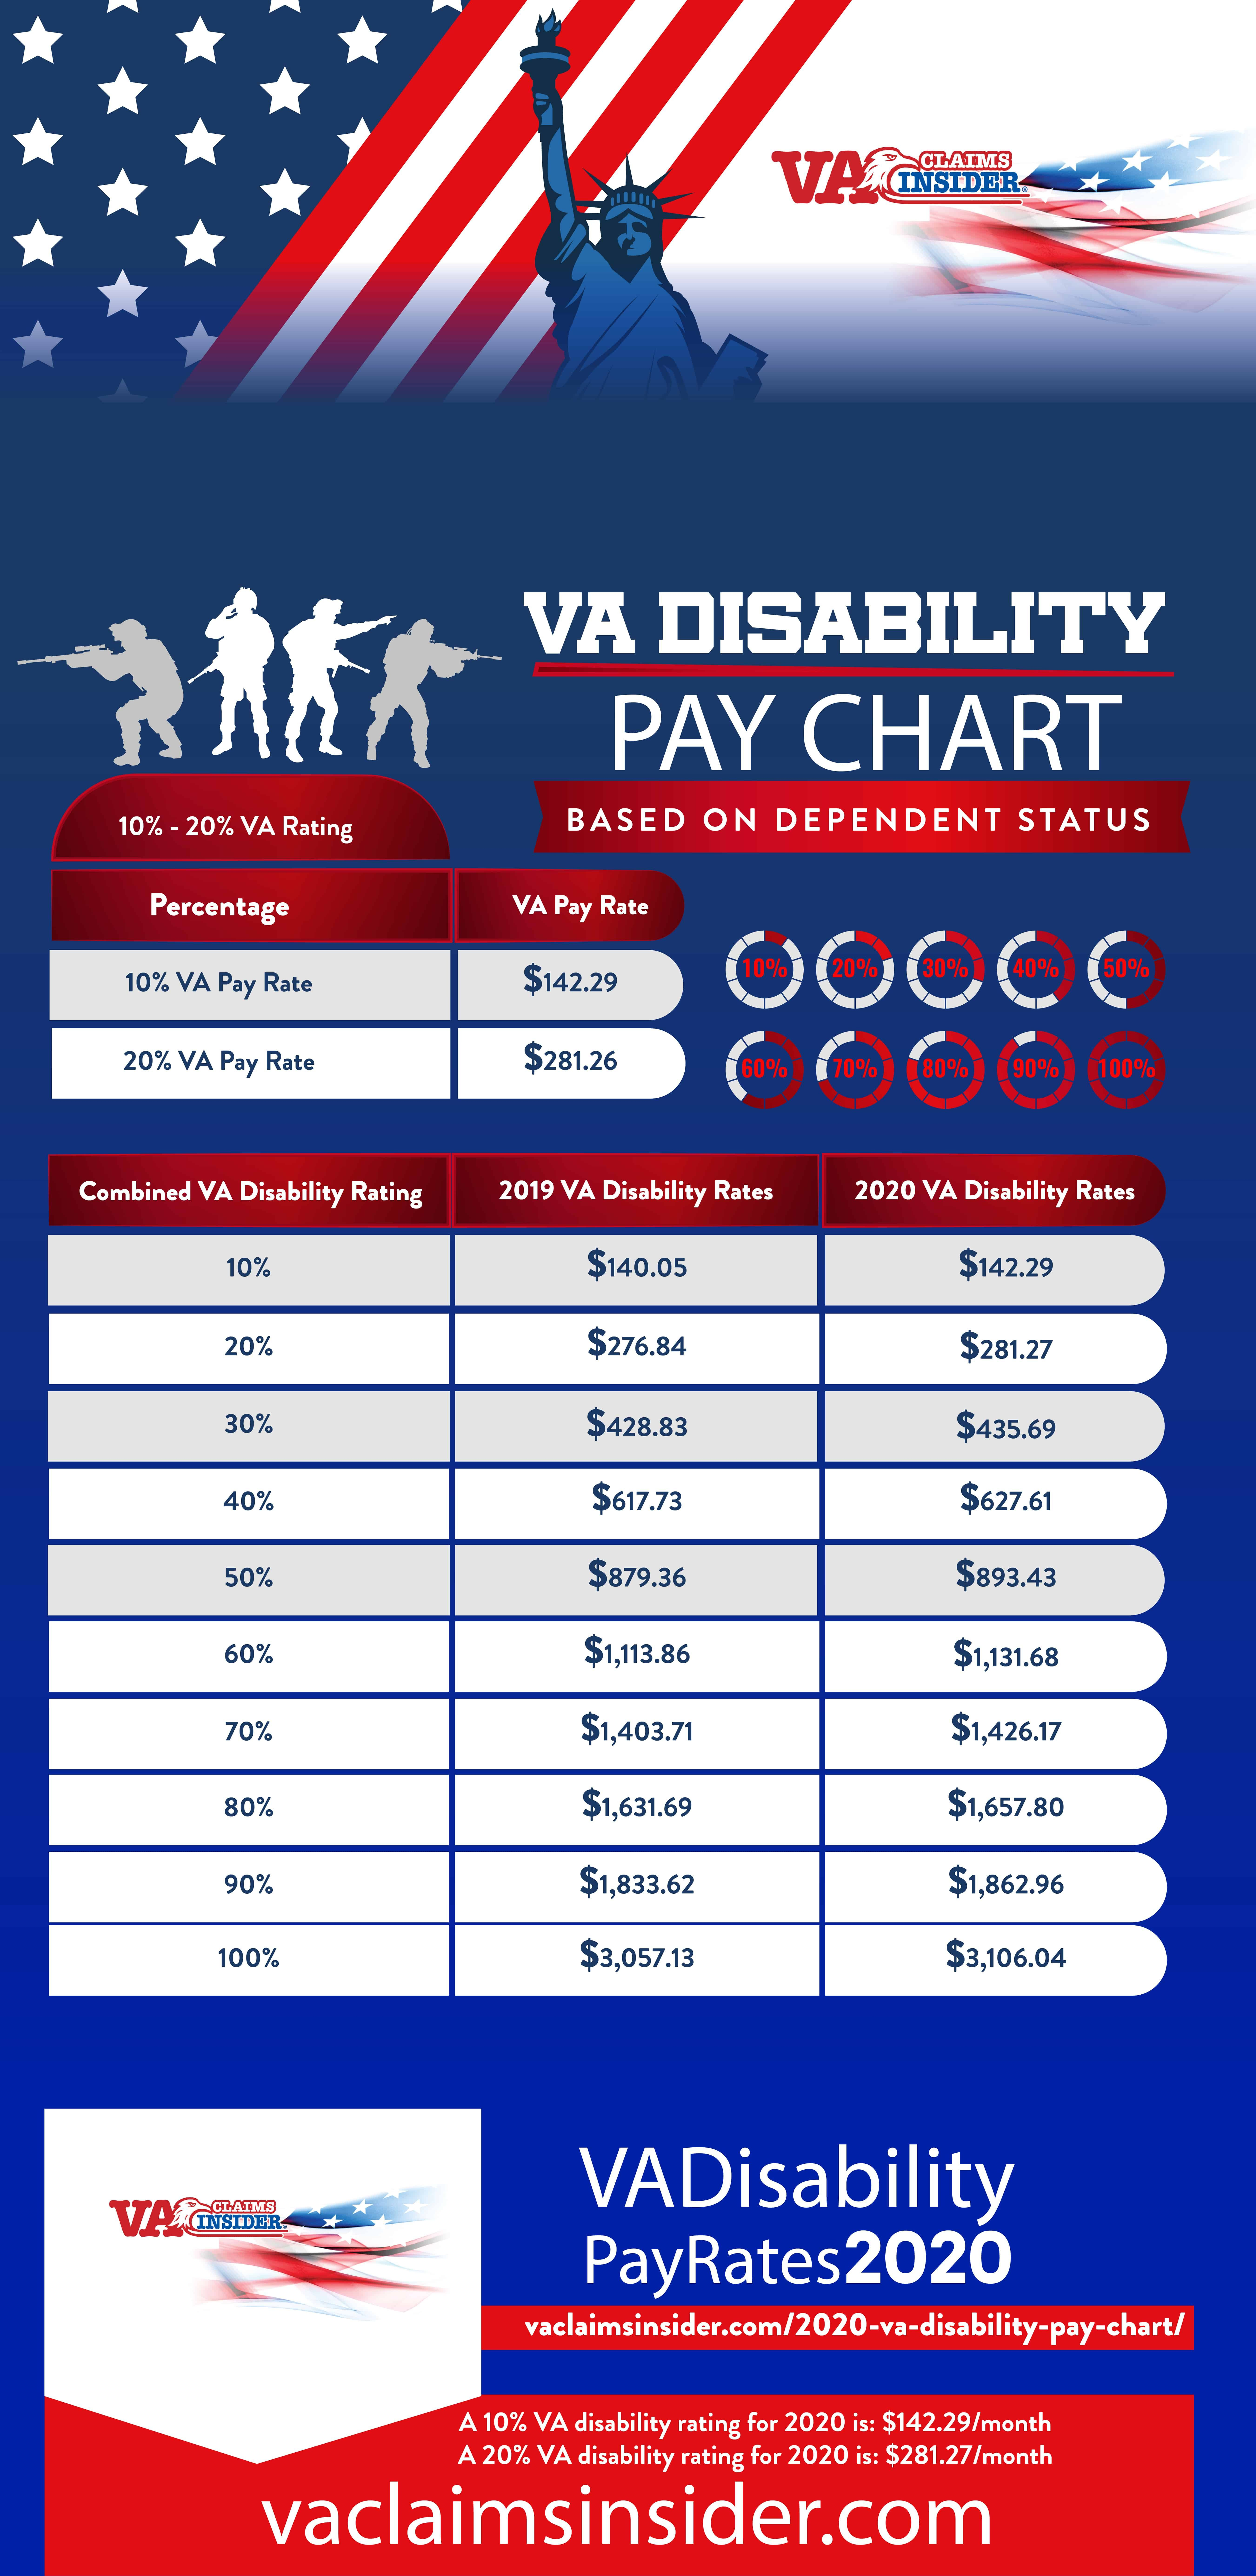 Military Medical Retirement Pay Chart 2020 In 2020 | Va